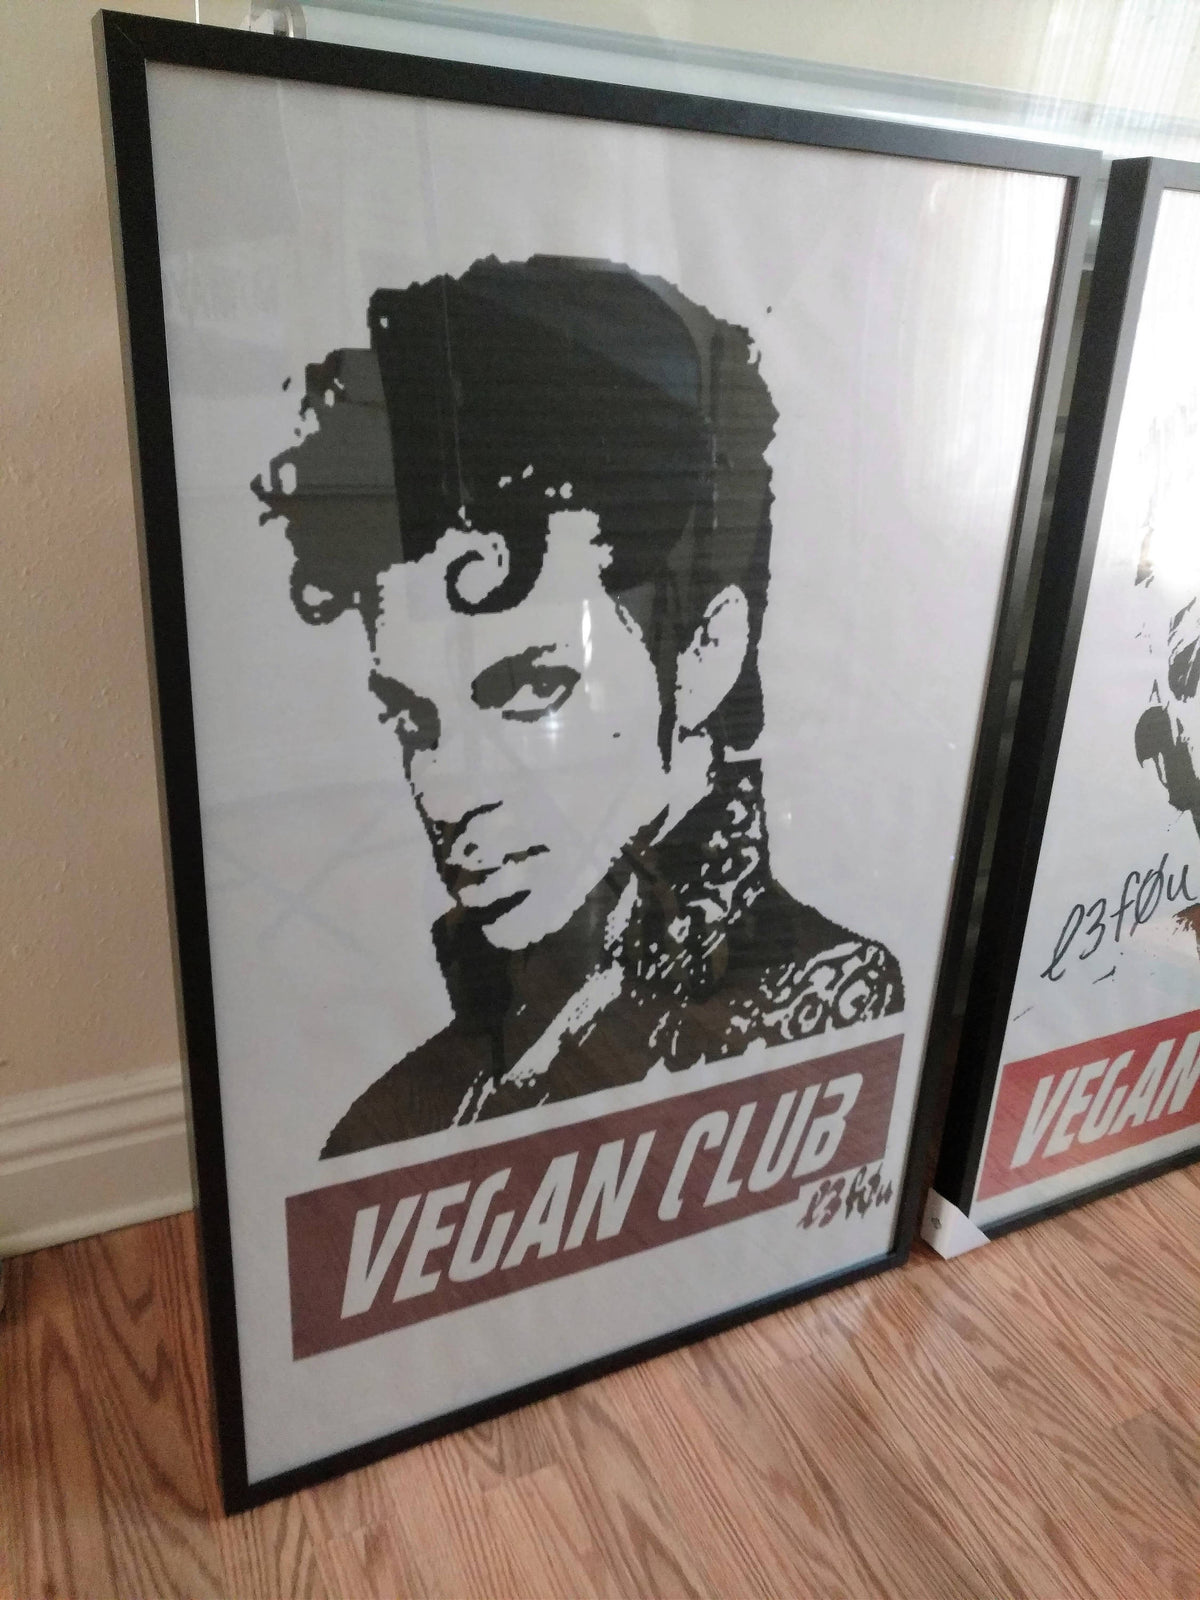 Framed on black wood Street Art NewsPrint Poster 24x36 Vegan Club featuring Prince signed by LeFou